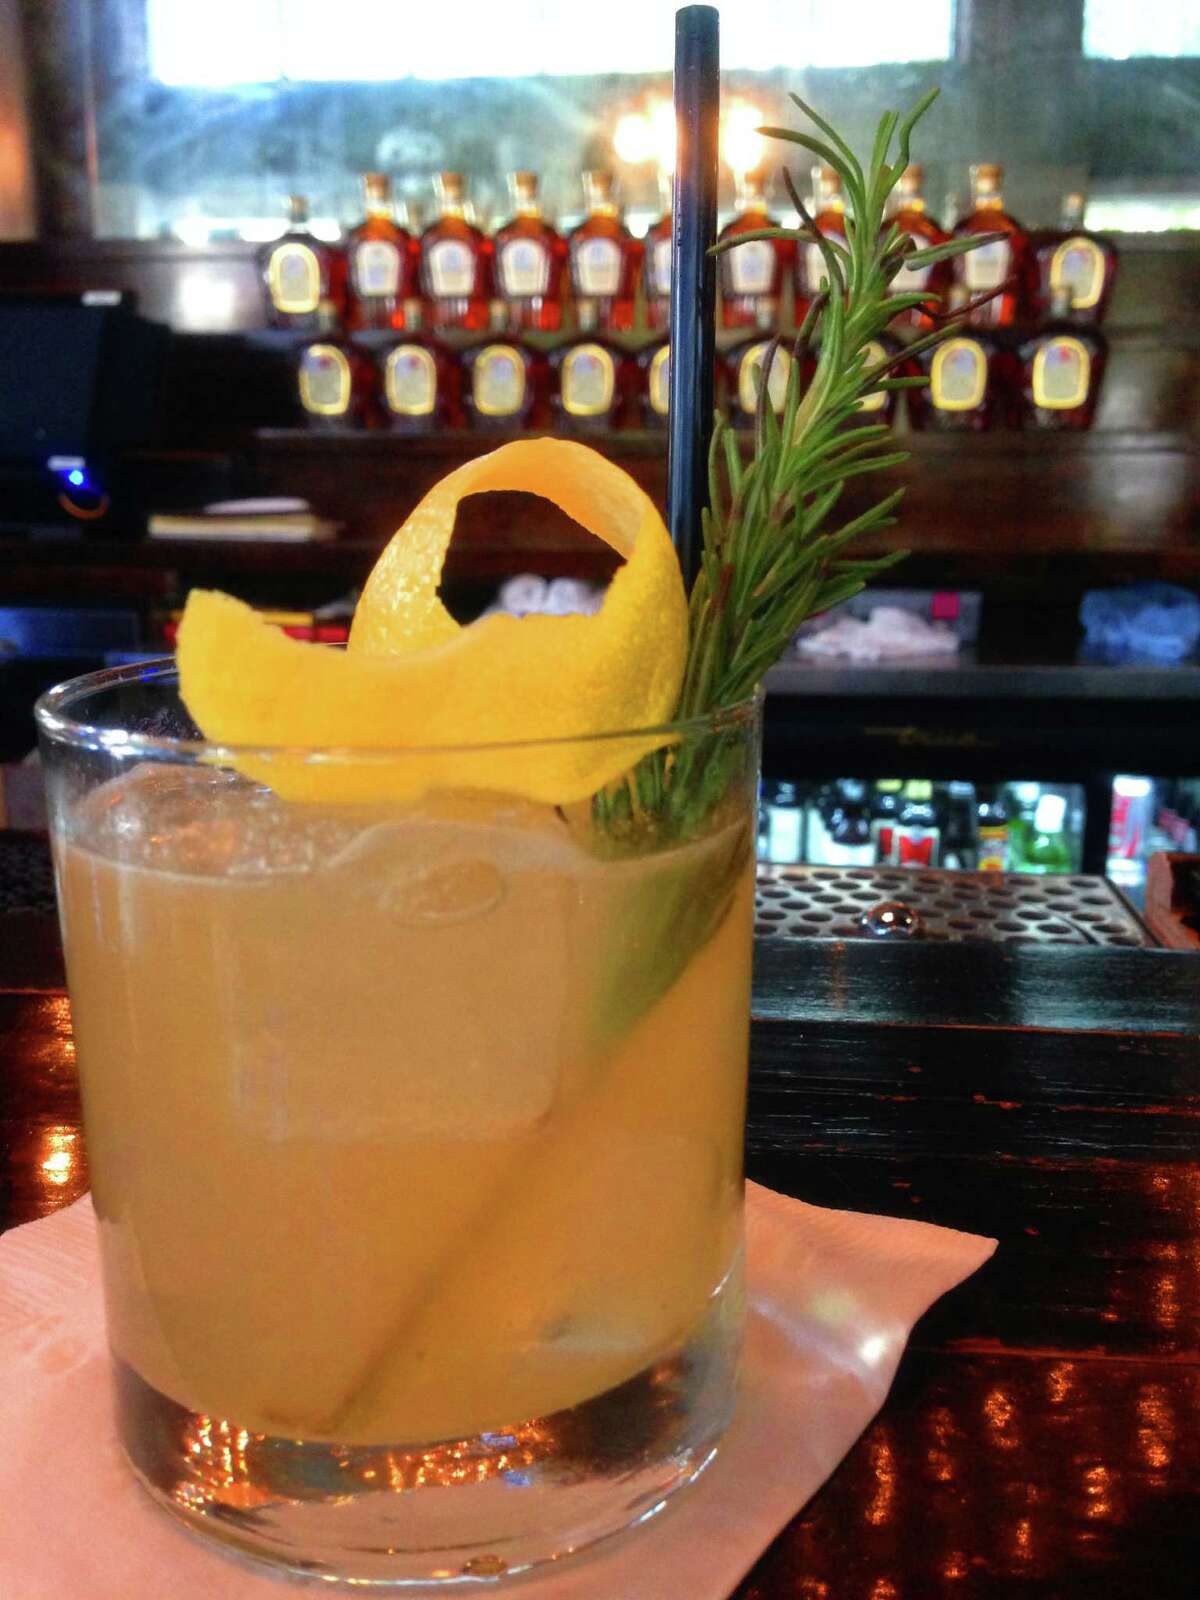 Coal Miner's Daughter is a cocktail made with Crown Royal Northern Harvest Rye, lemon juice, honey and a rosemary sprig.